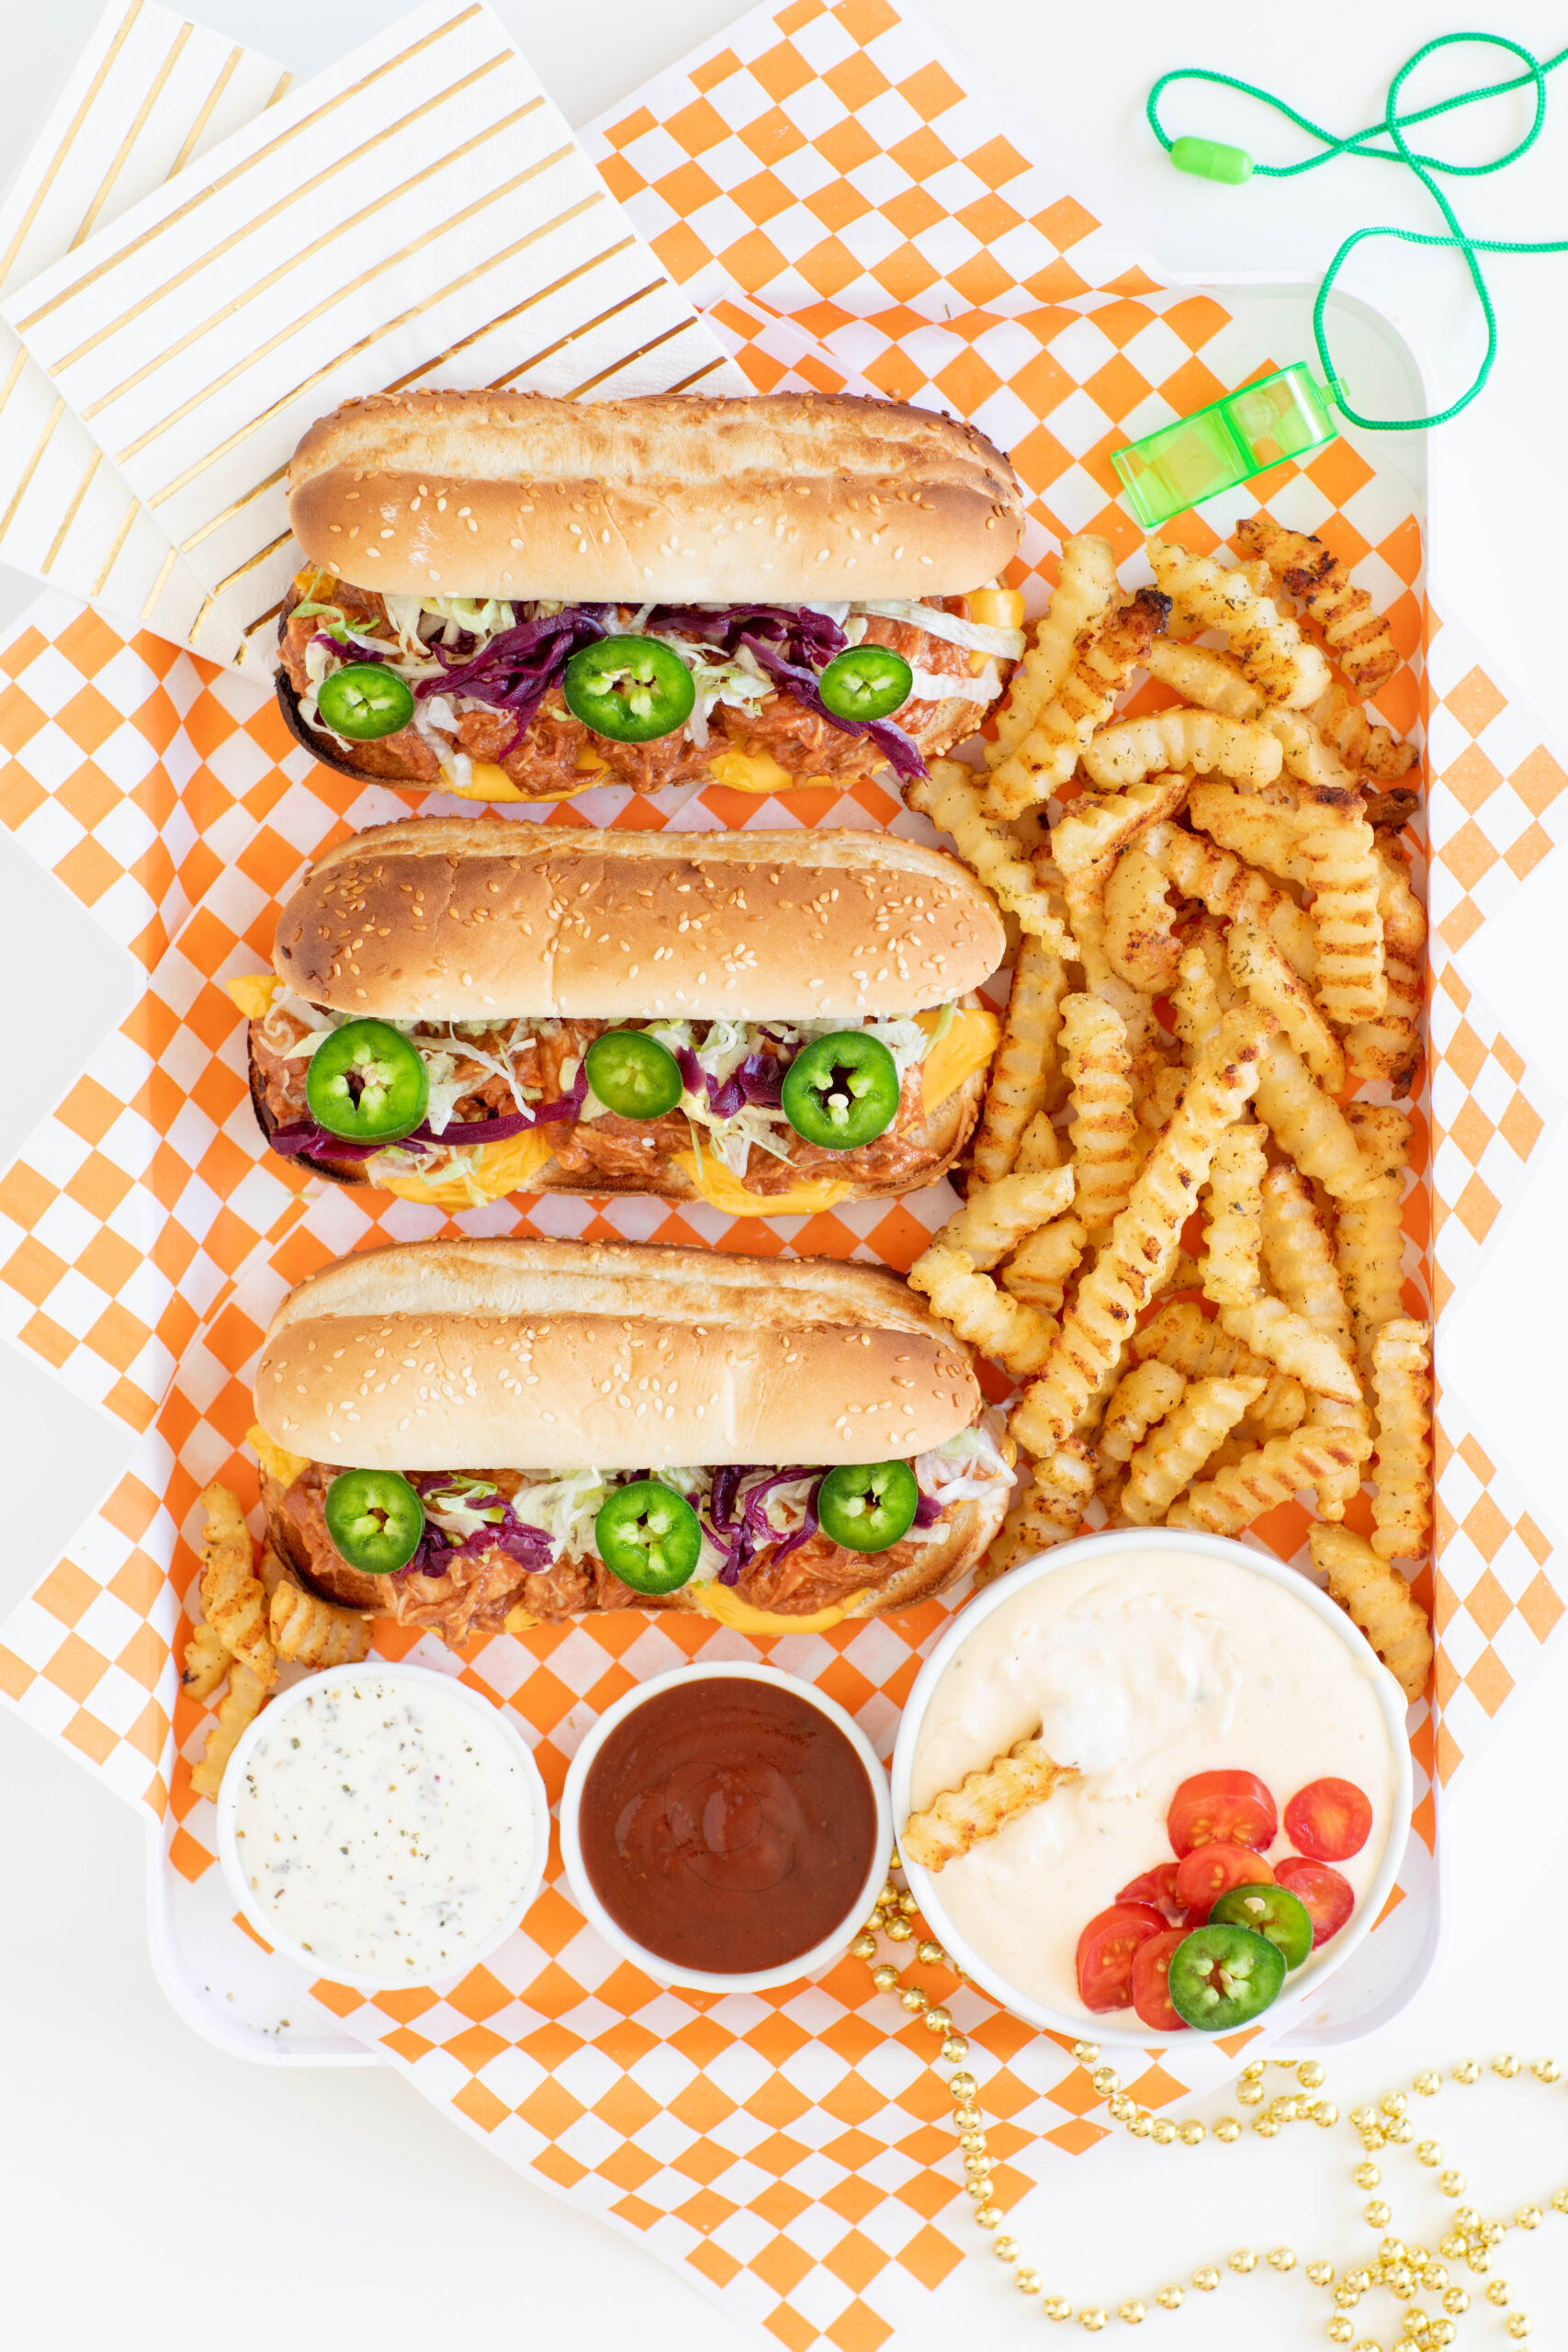 basketball sandwich platter with long pulled chicken sandwiches served in sesame seed buns and topped with jalapeño slices, picked cabbage, shredded lettuce. crinkle fries.